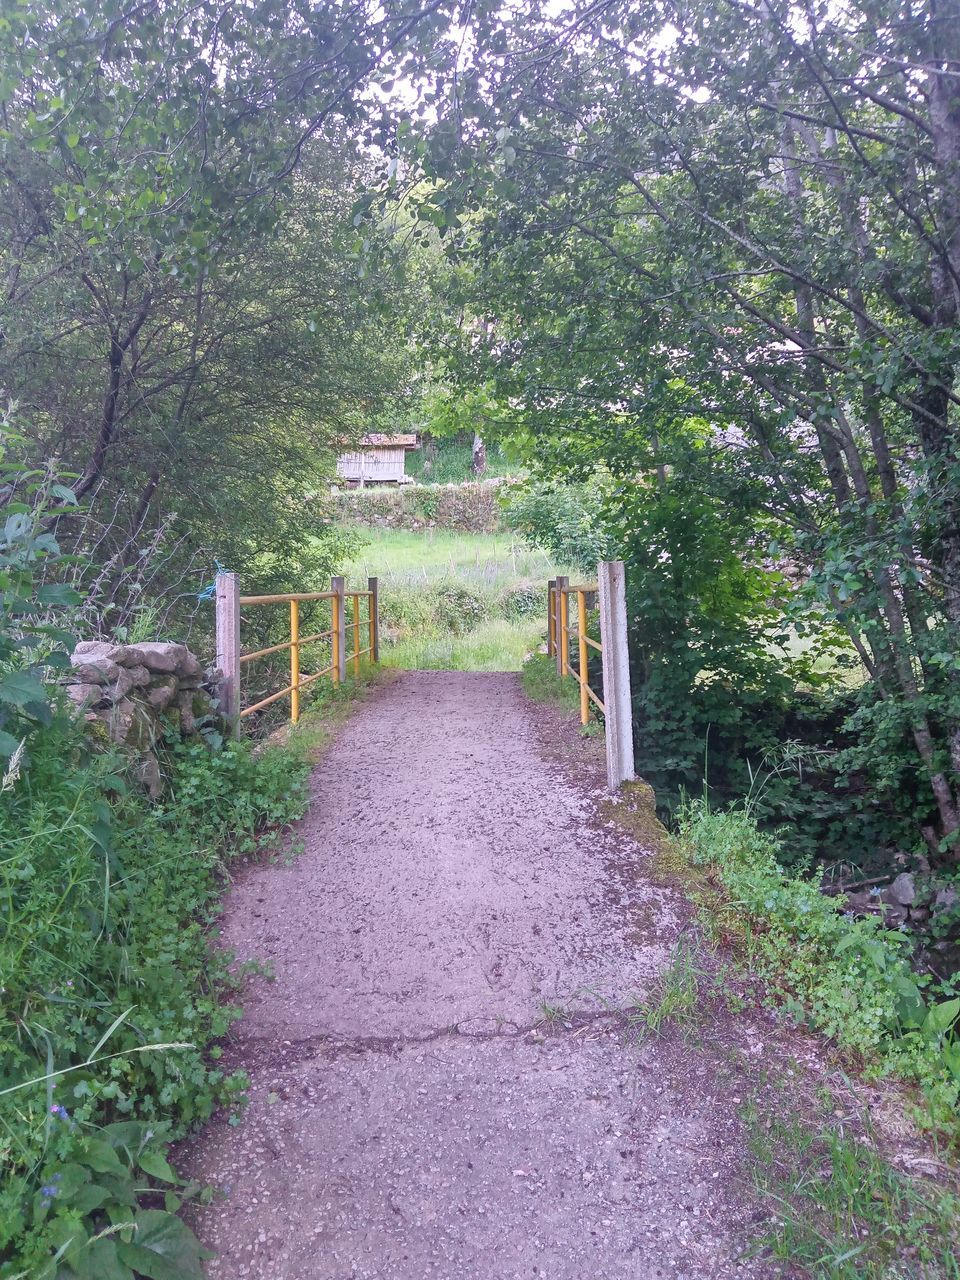 FOOTPATH LEADING TOWARDS GATE IN PARK